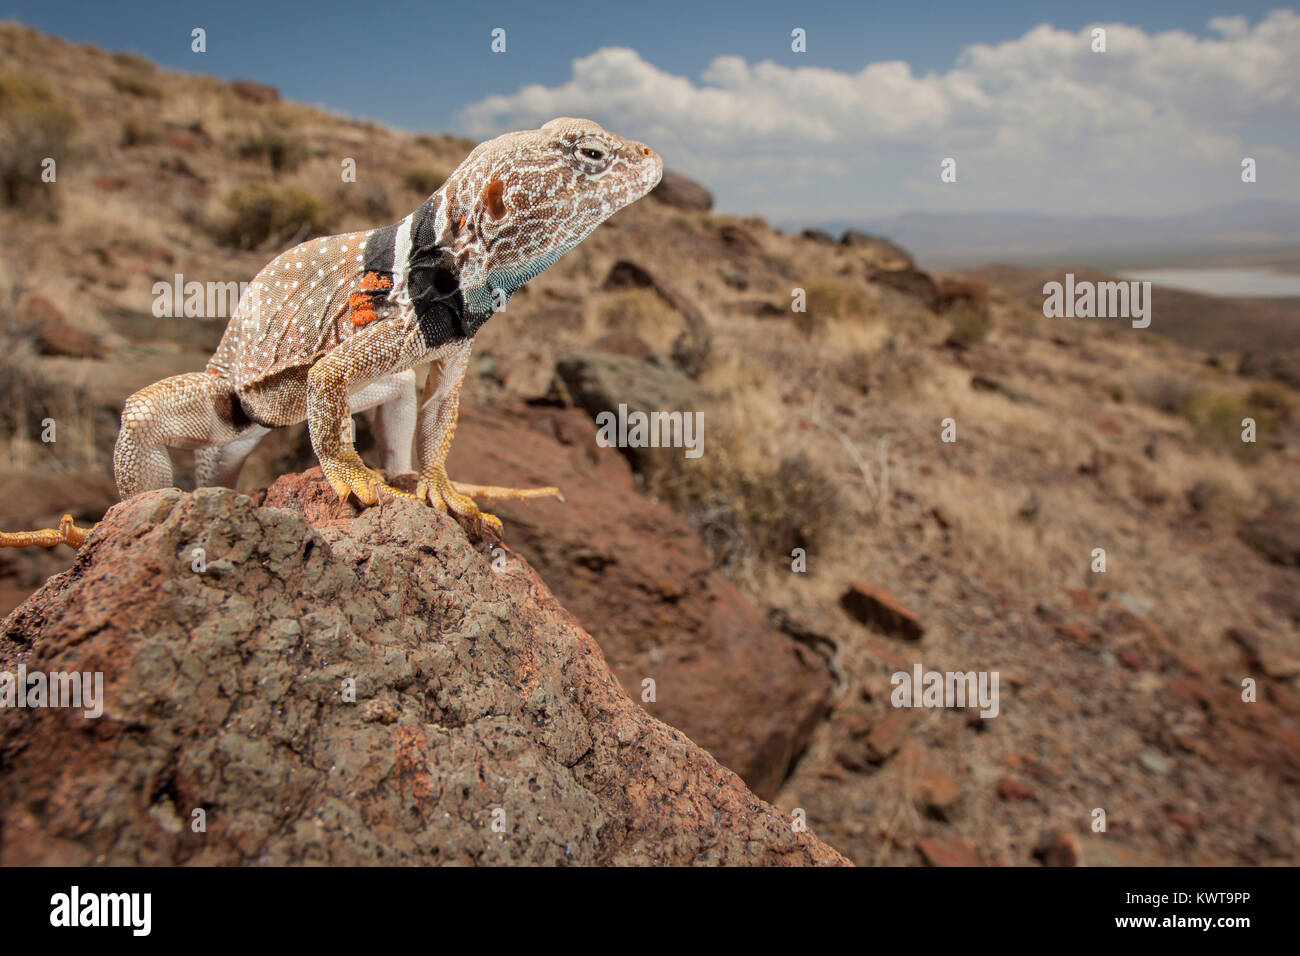 Great Basin collared lizard (Crotaphytus bicinctores) perched on a rock with sweeping vista in the background. Oregon, USA. Stock Photo